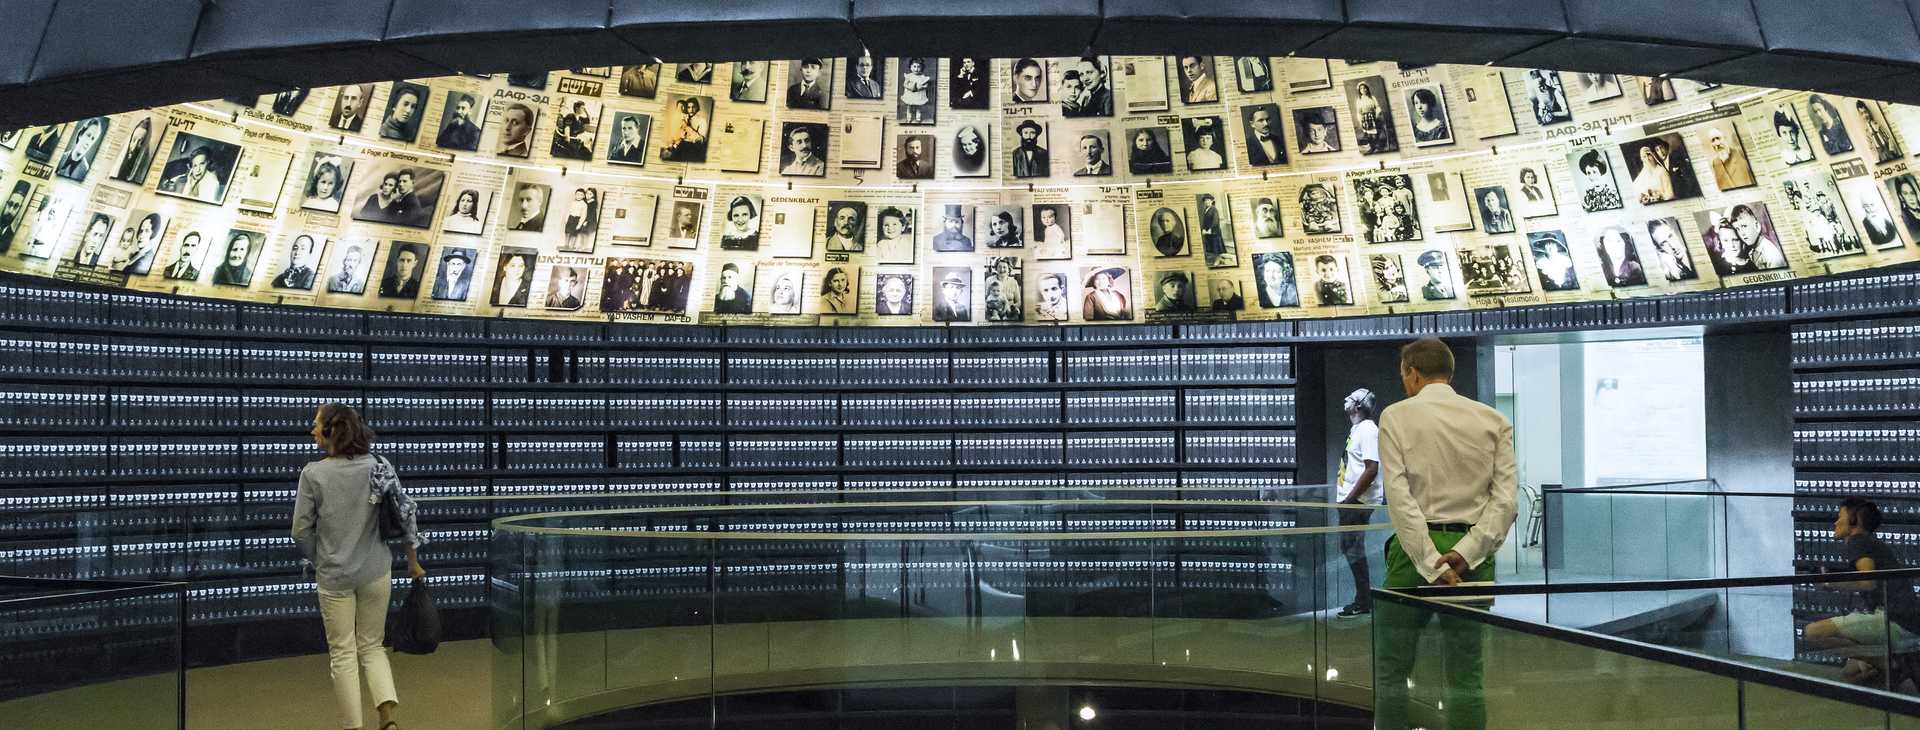 Yad Vashem, the World Holocaust Remembrance Center in Jerusalem, is situated on a 45-acre campus comprising museums, exhibitions, monuments, sculptures, and memorial sites.
